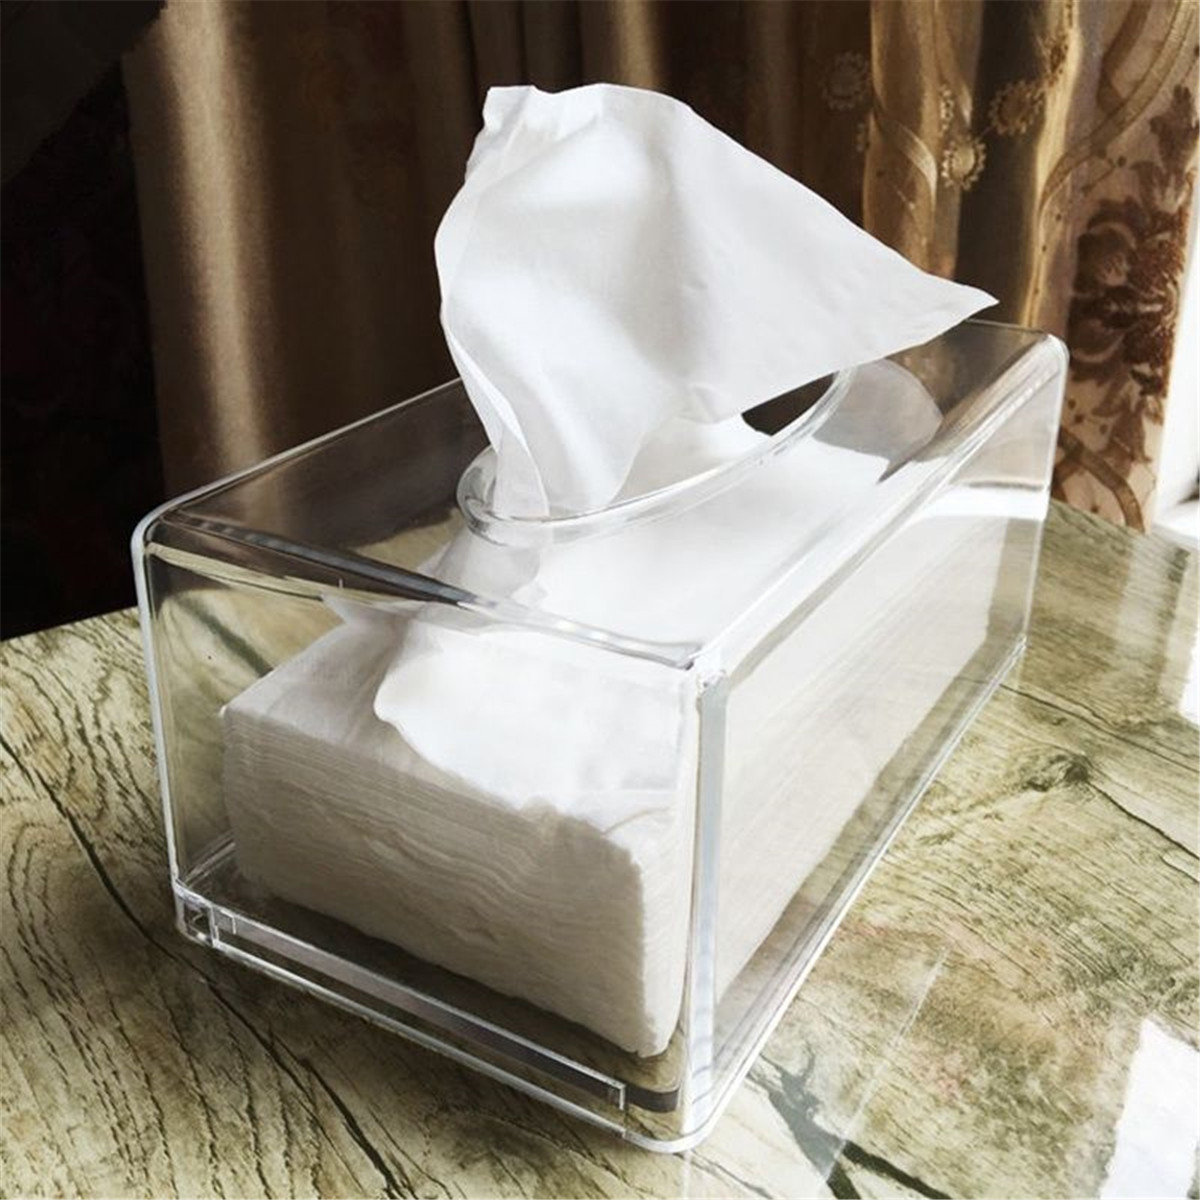 aoory Facial Tissue Dispenser Box Cover Holder Clear Rectangle Napkin Organizer for 